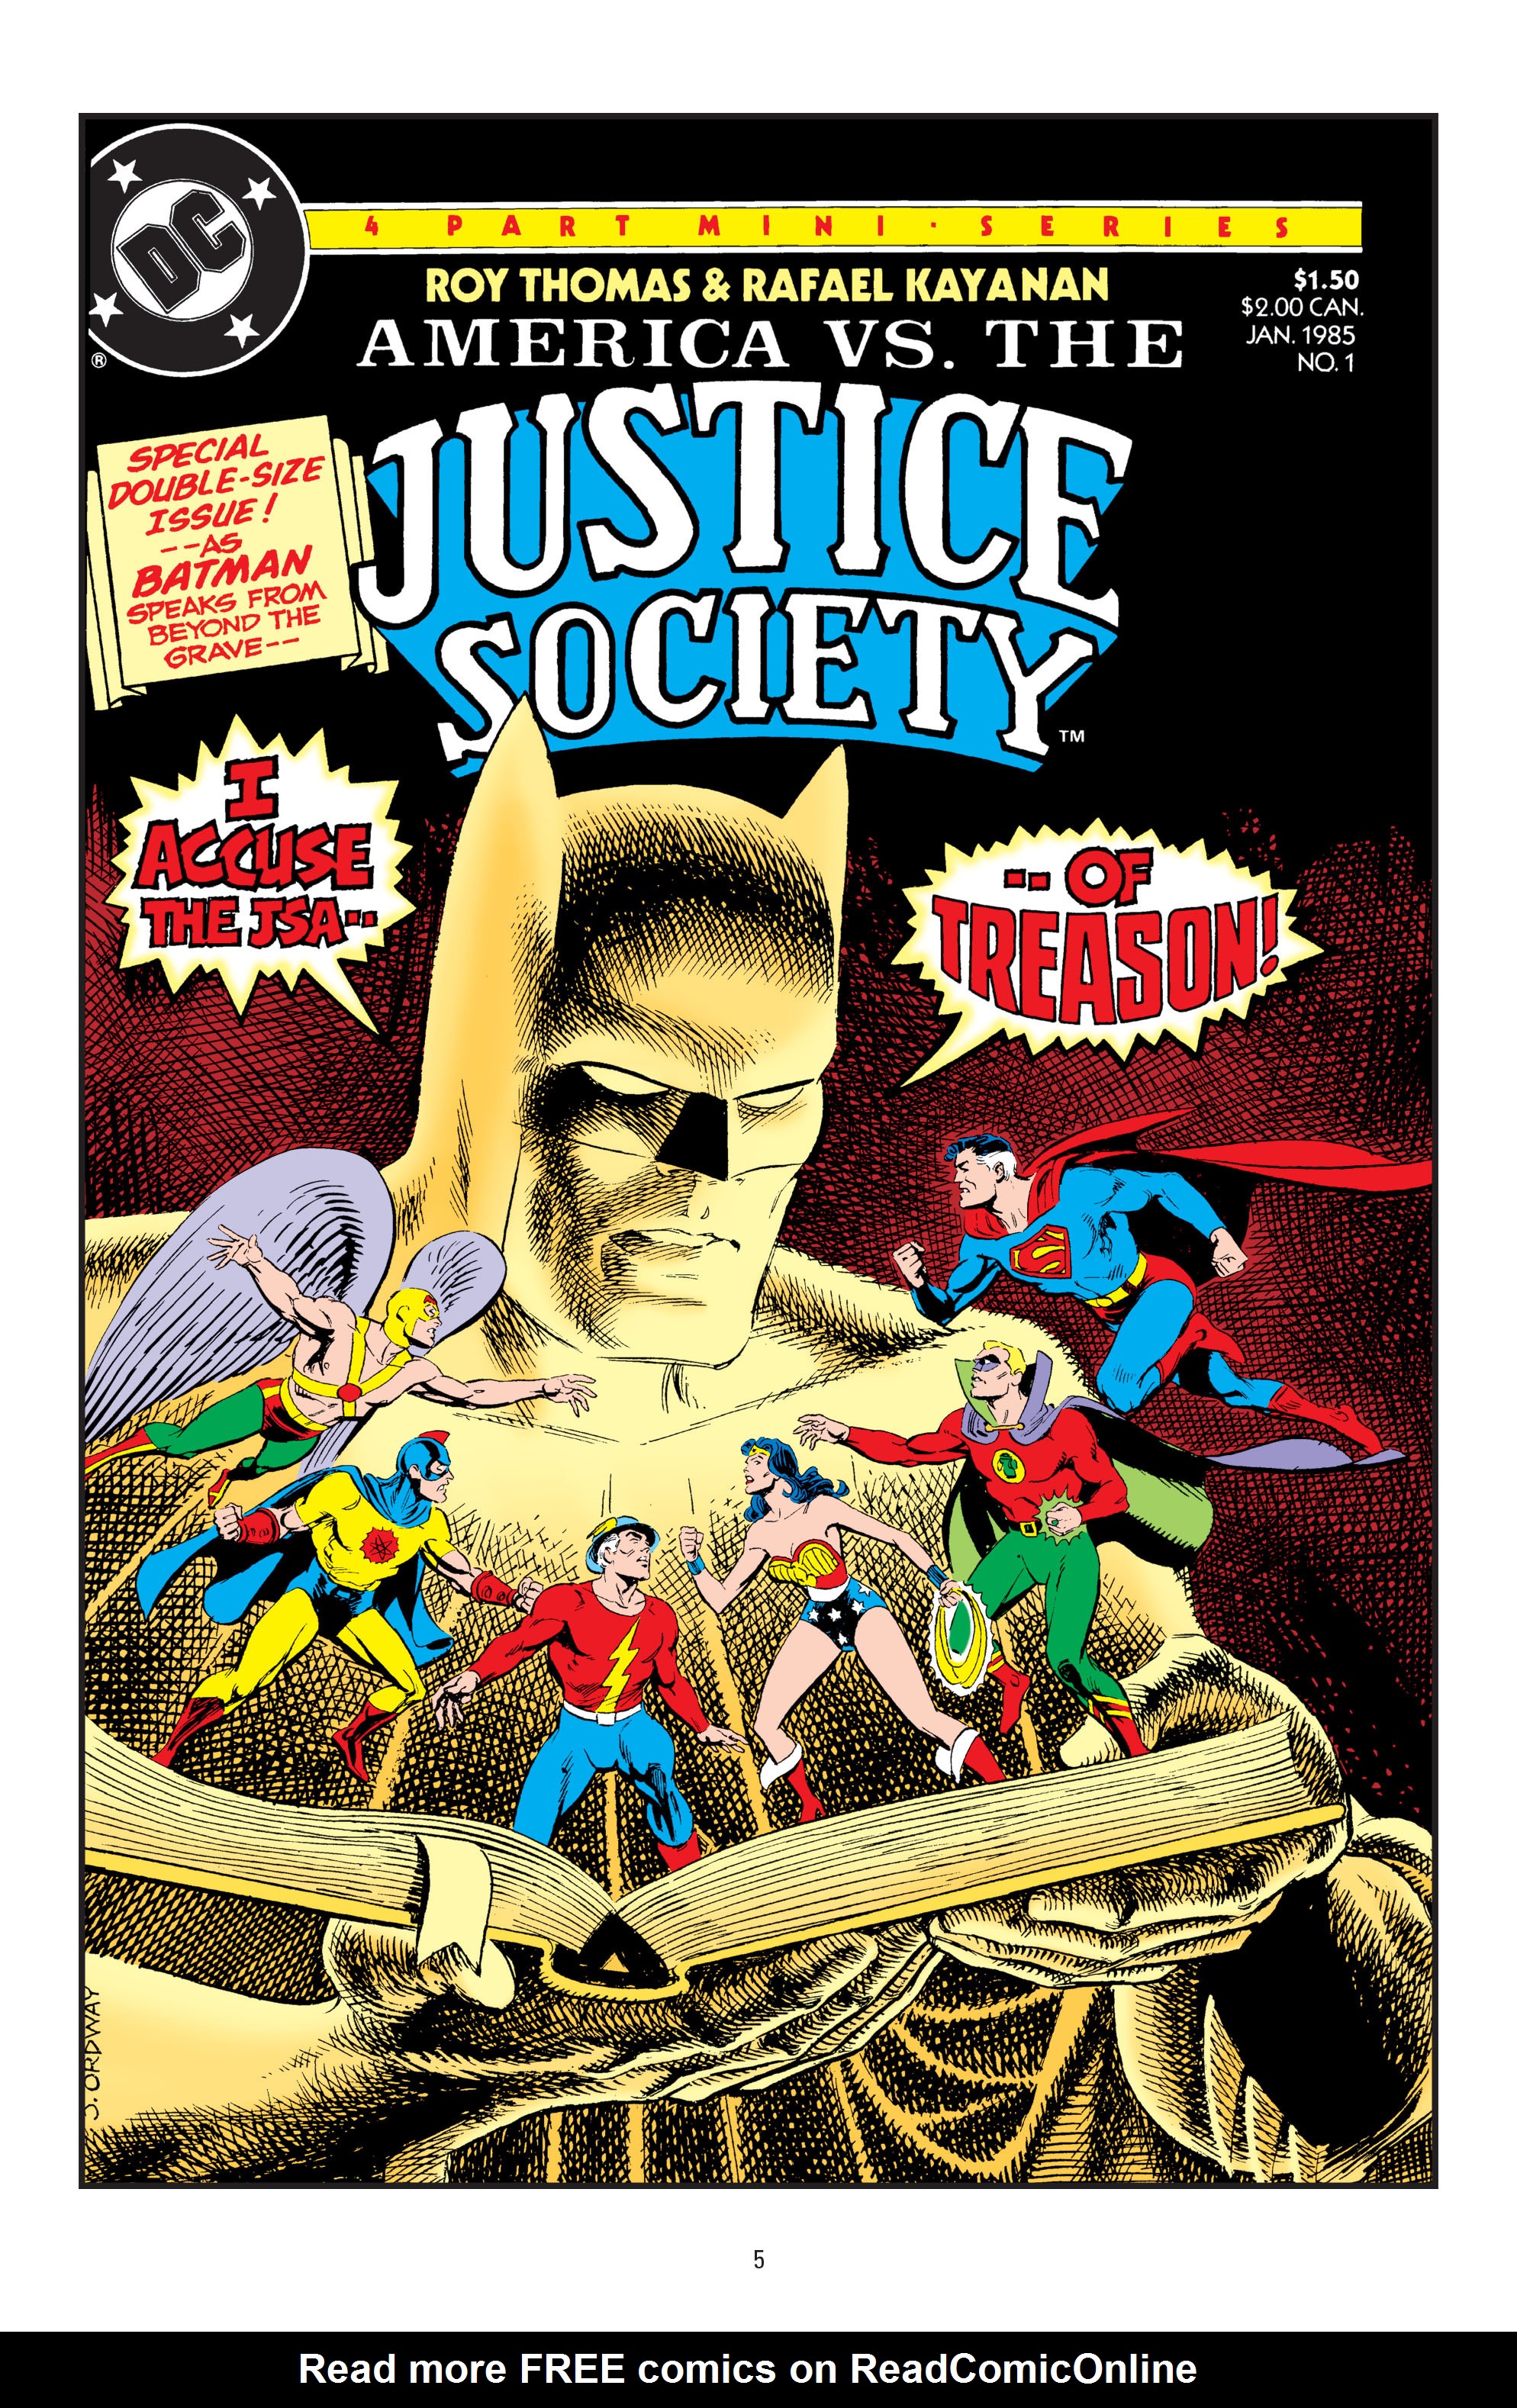 Read online America vs. the Justice Society comic -  Issue # TPB - 6